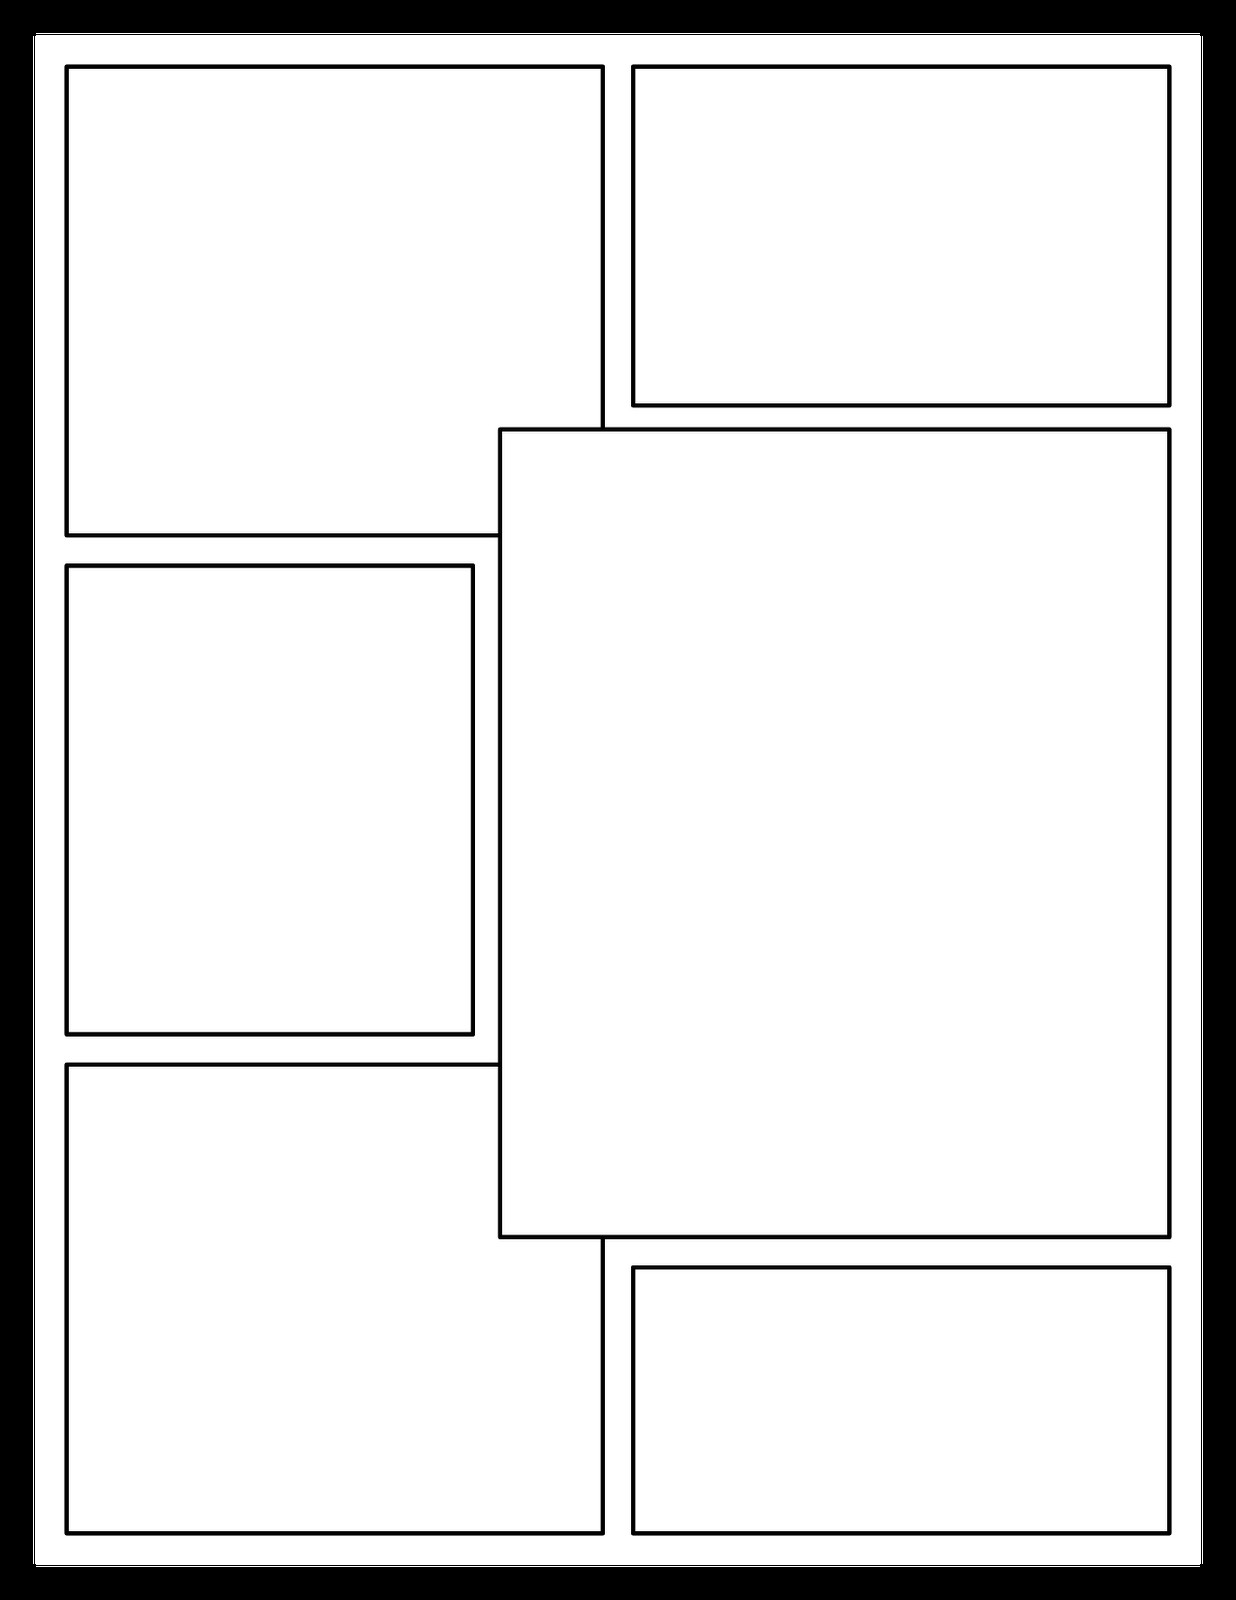 Comic Book Panel Template Mrs orman S Classroom Fering Choices for Your Readers